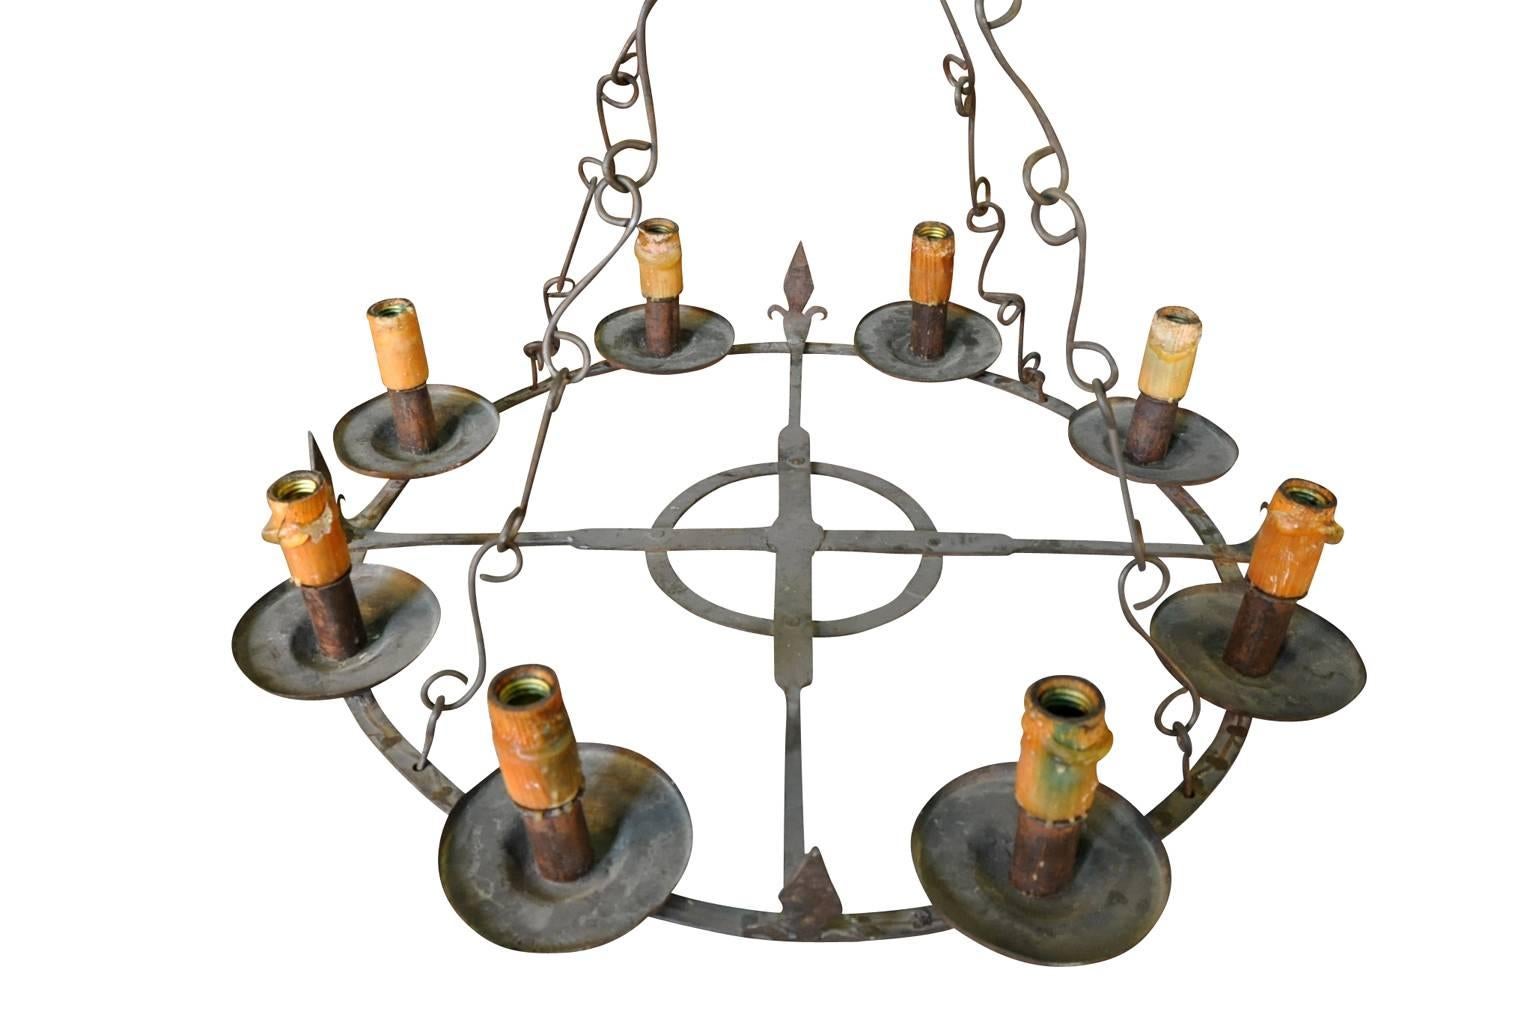 A very handsome late 19th century chandelier, beautifully crafted from iron.